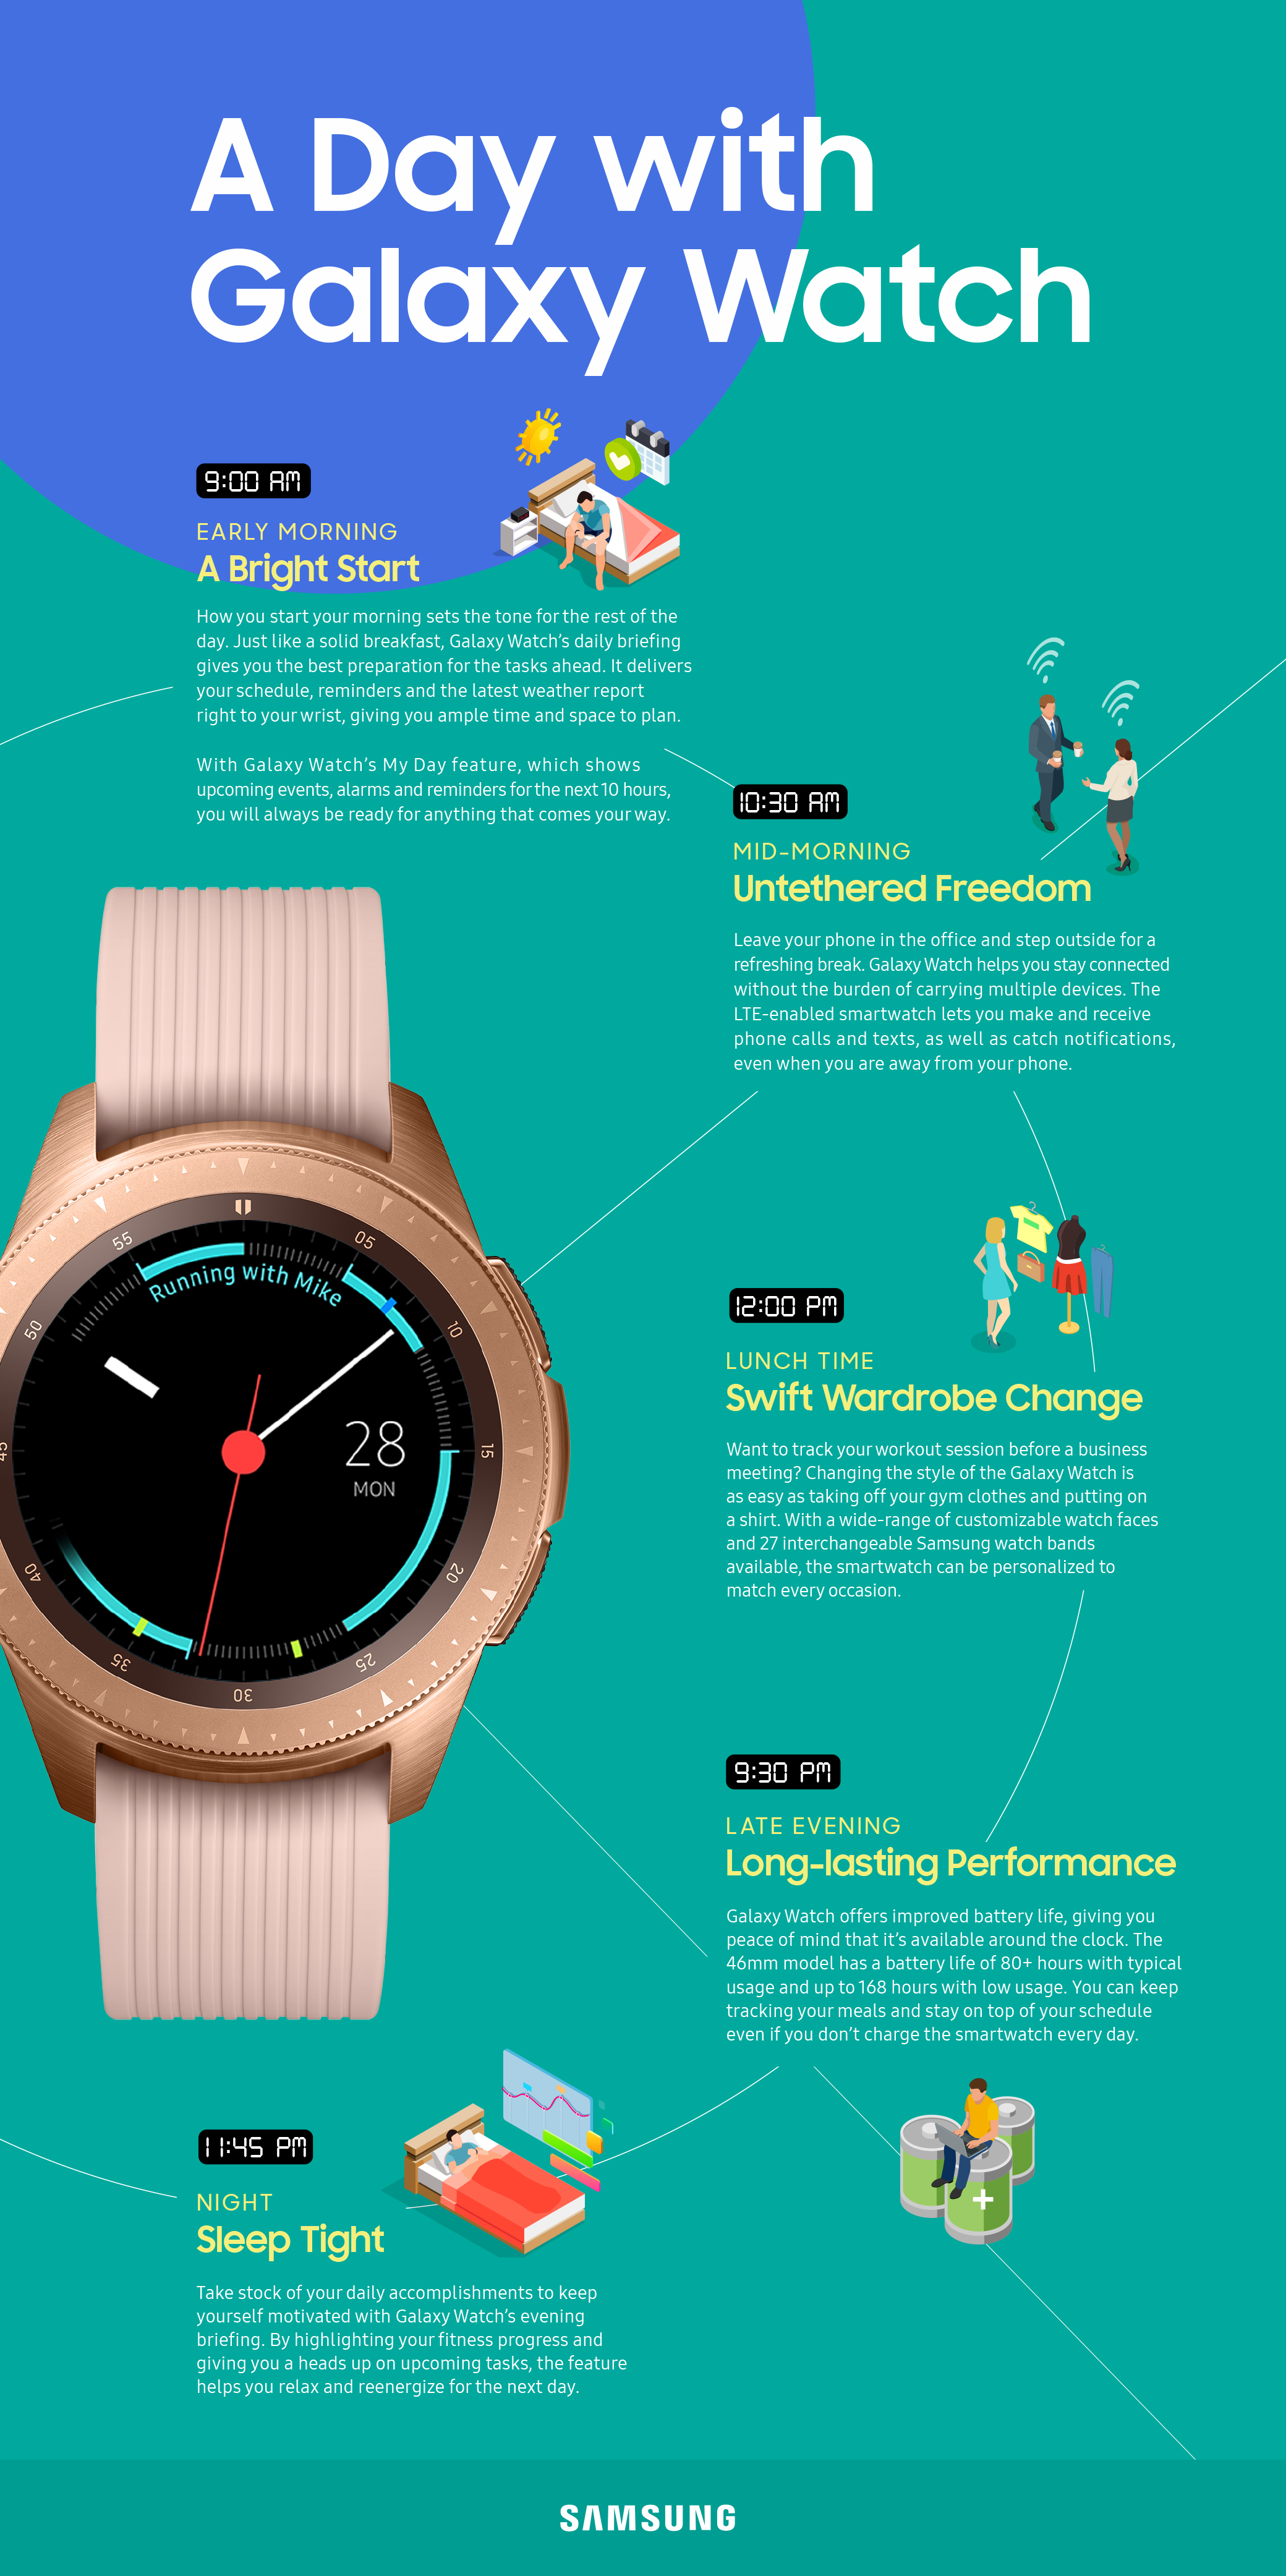 Live Smart with Galaxy Watch